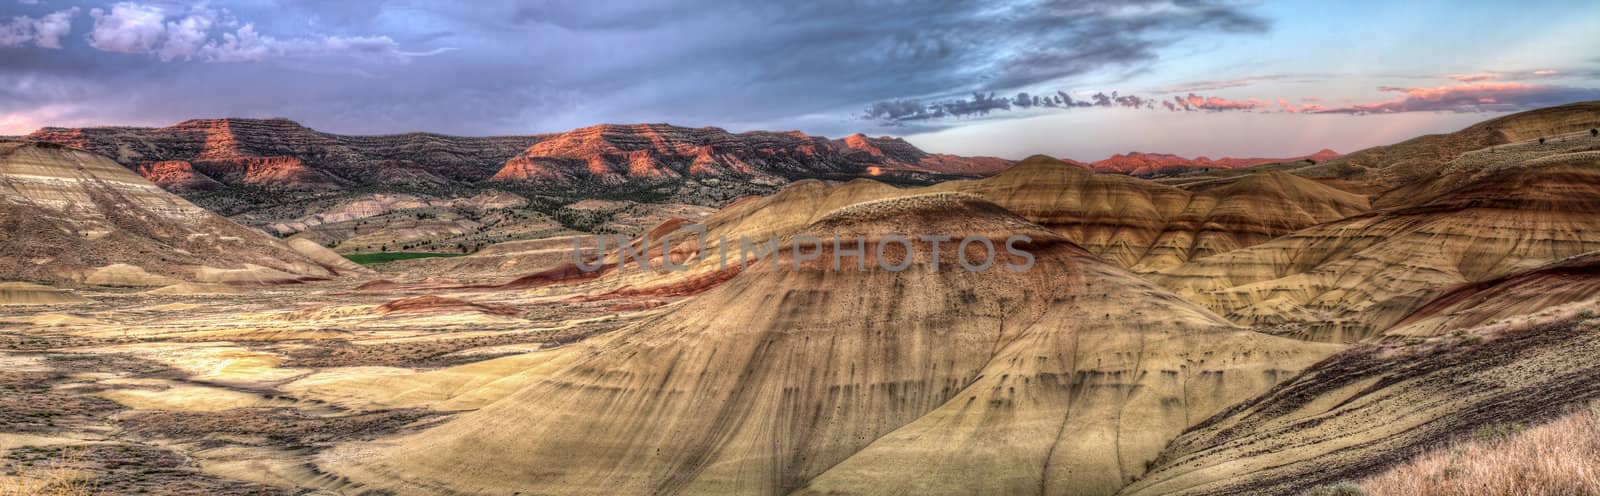 Painted Hills in Oregon Panorama by Davidgn